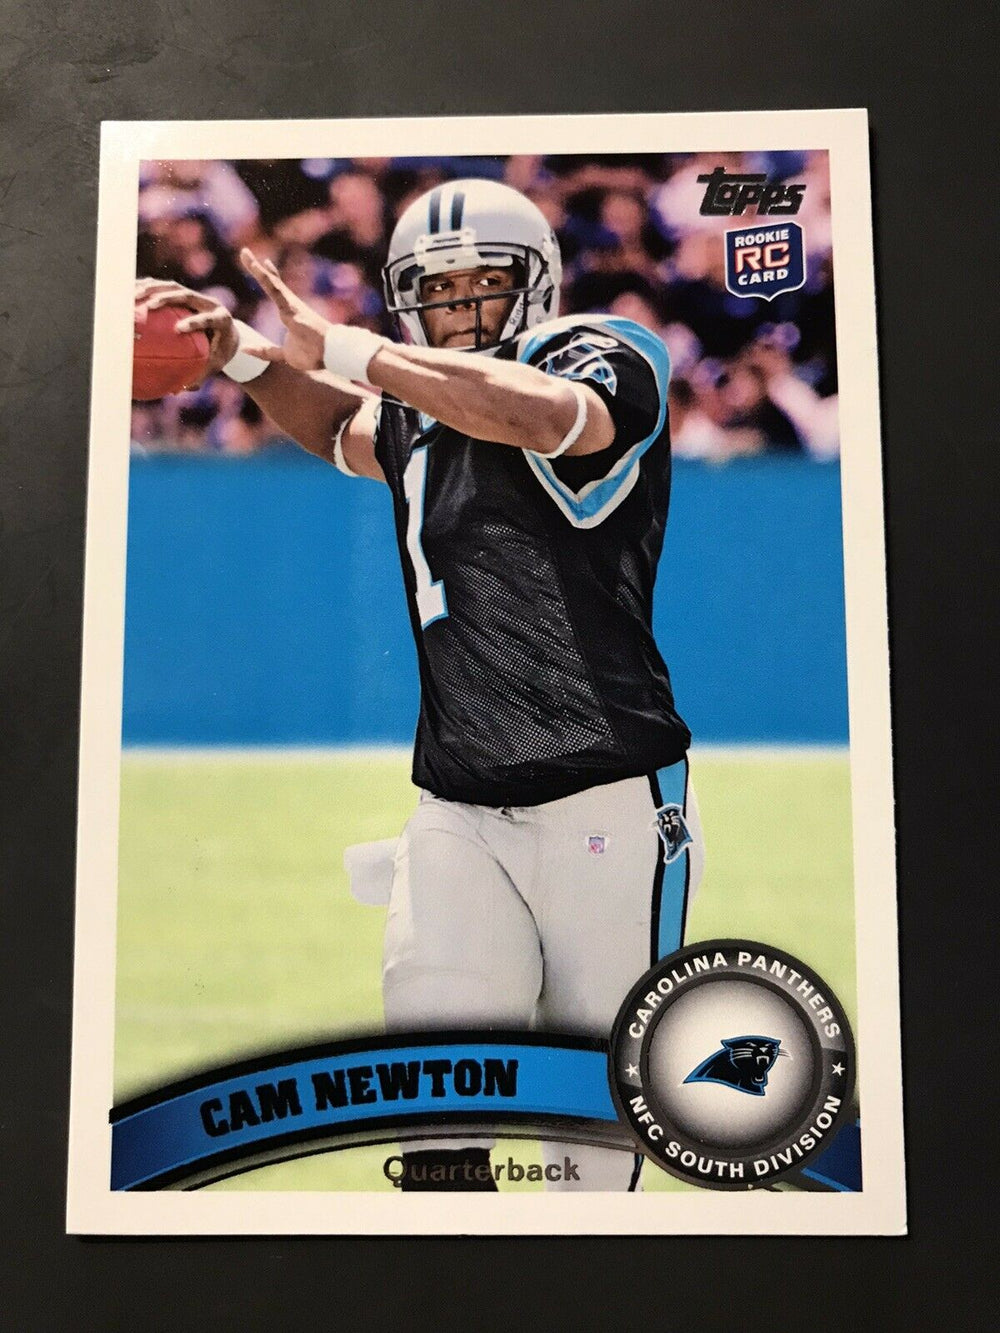 Cam Newton 2011 Topps VARIATION Mint ROOKIE Card #200 (Blue Wall)